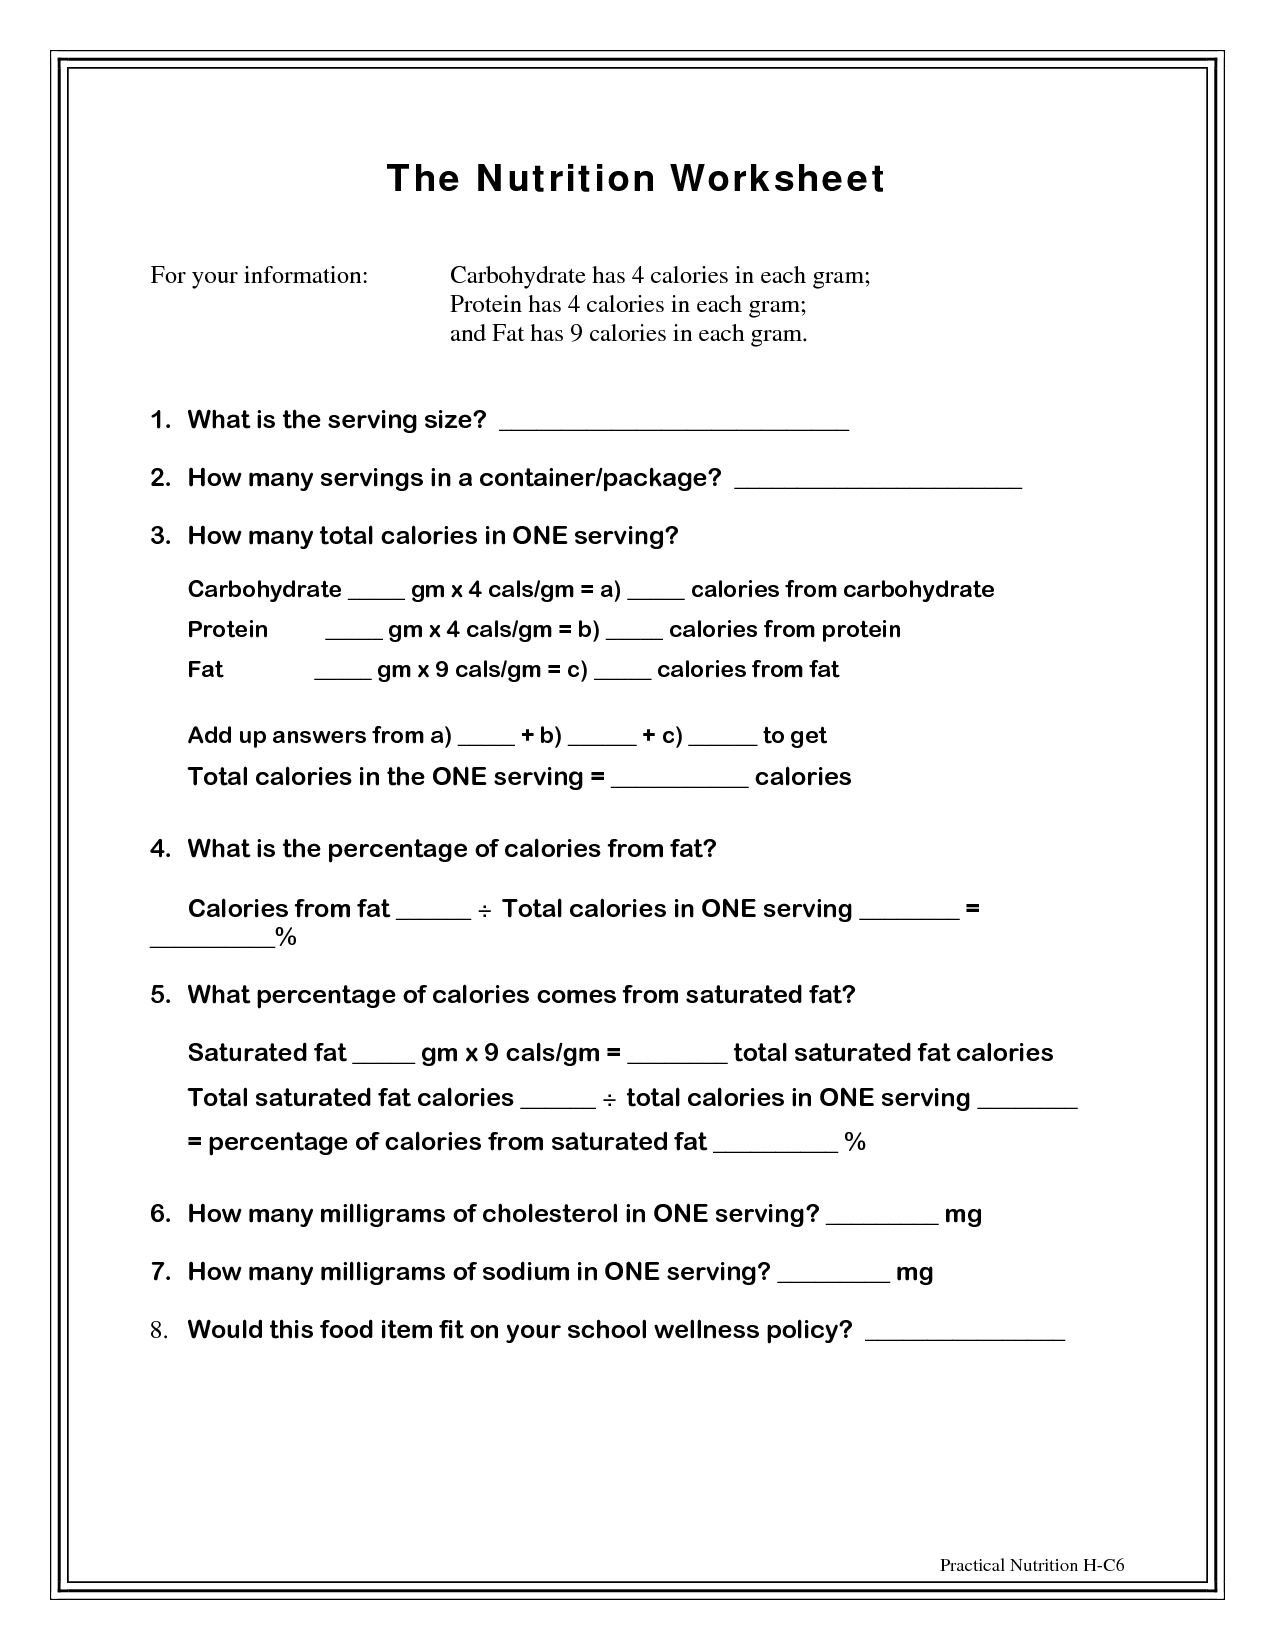 Food and Nutrition Worksheets Image